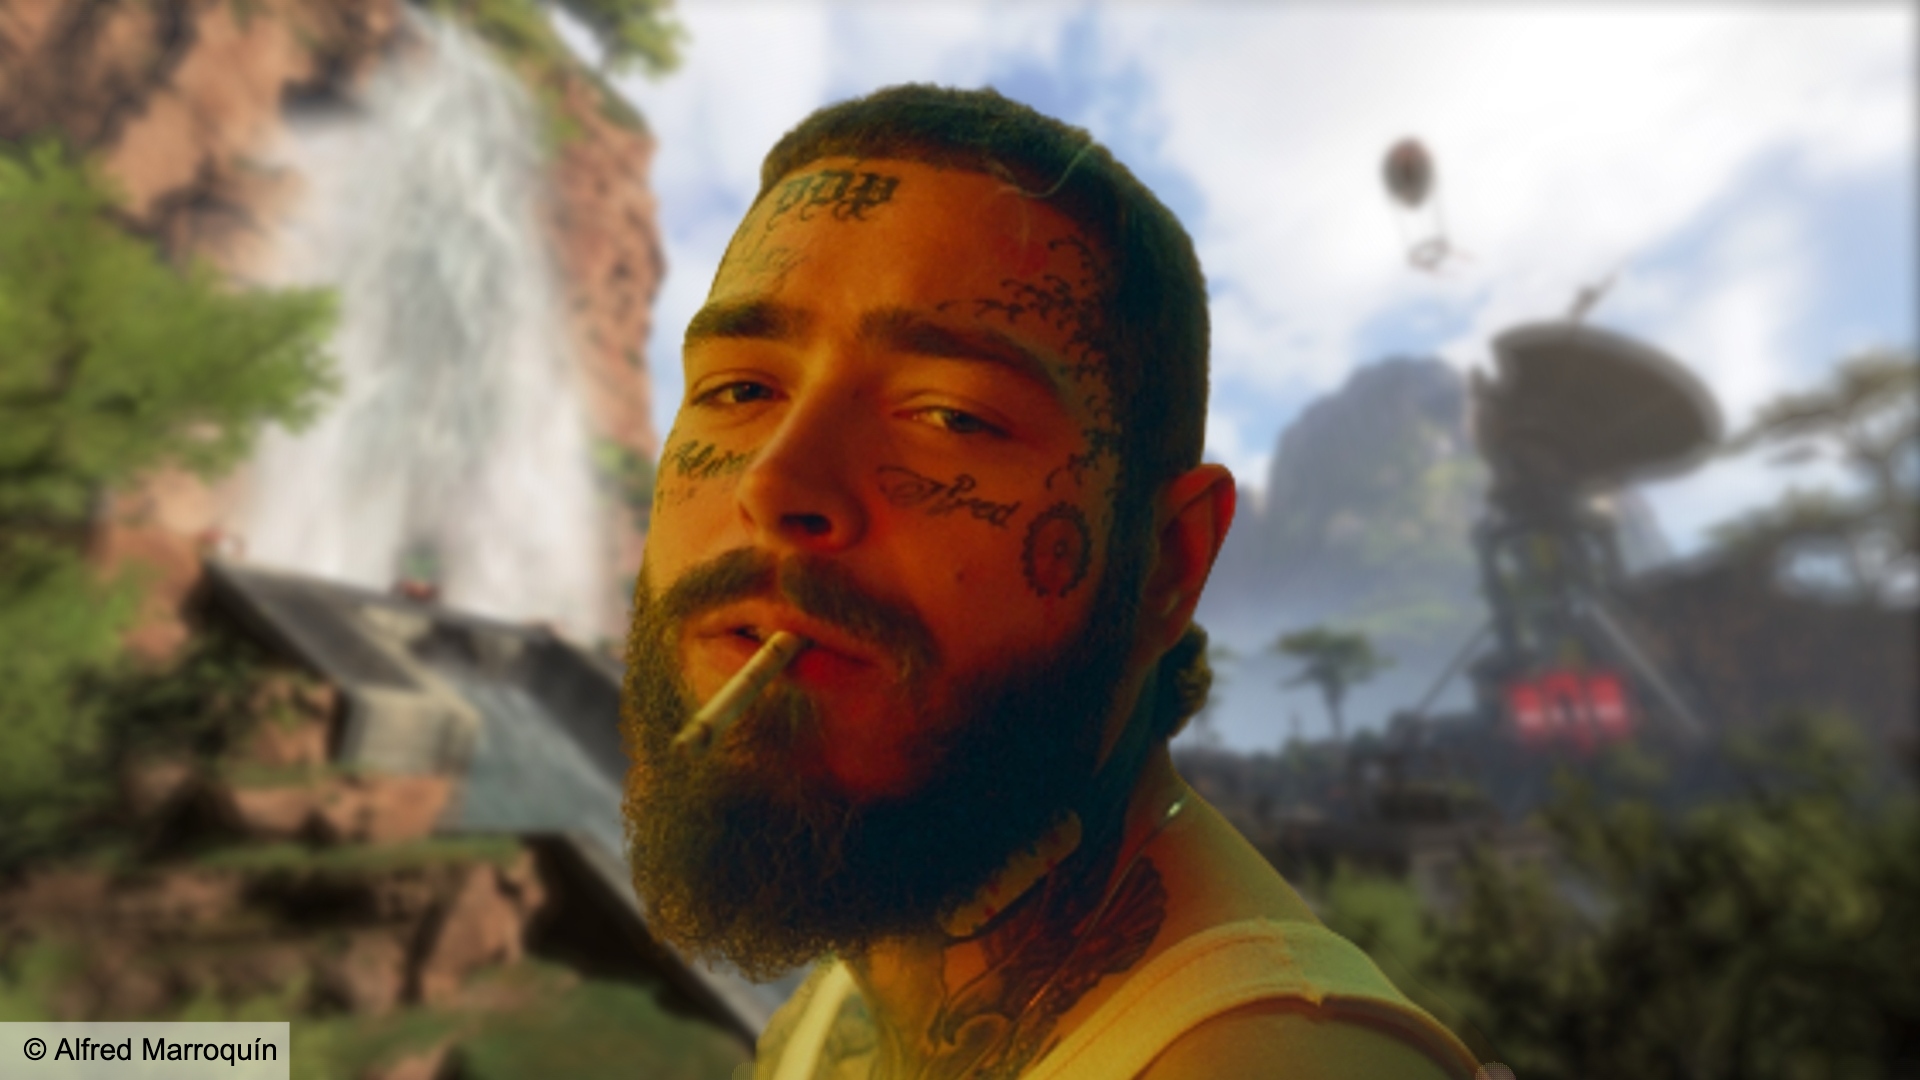 Post Malone is coming to Apex Legends, yes really